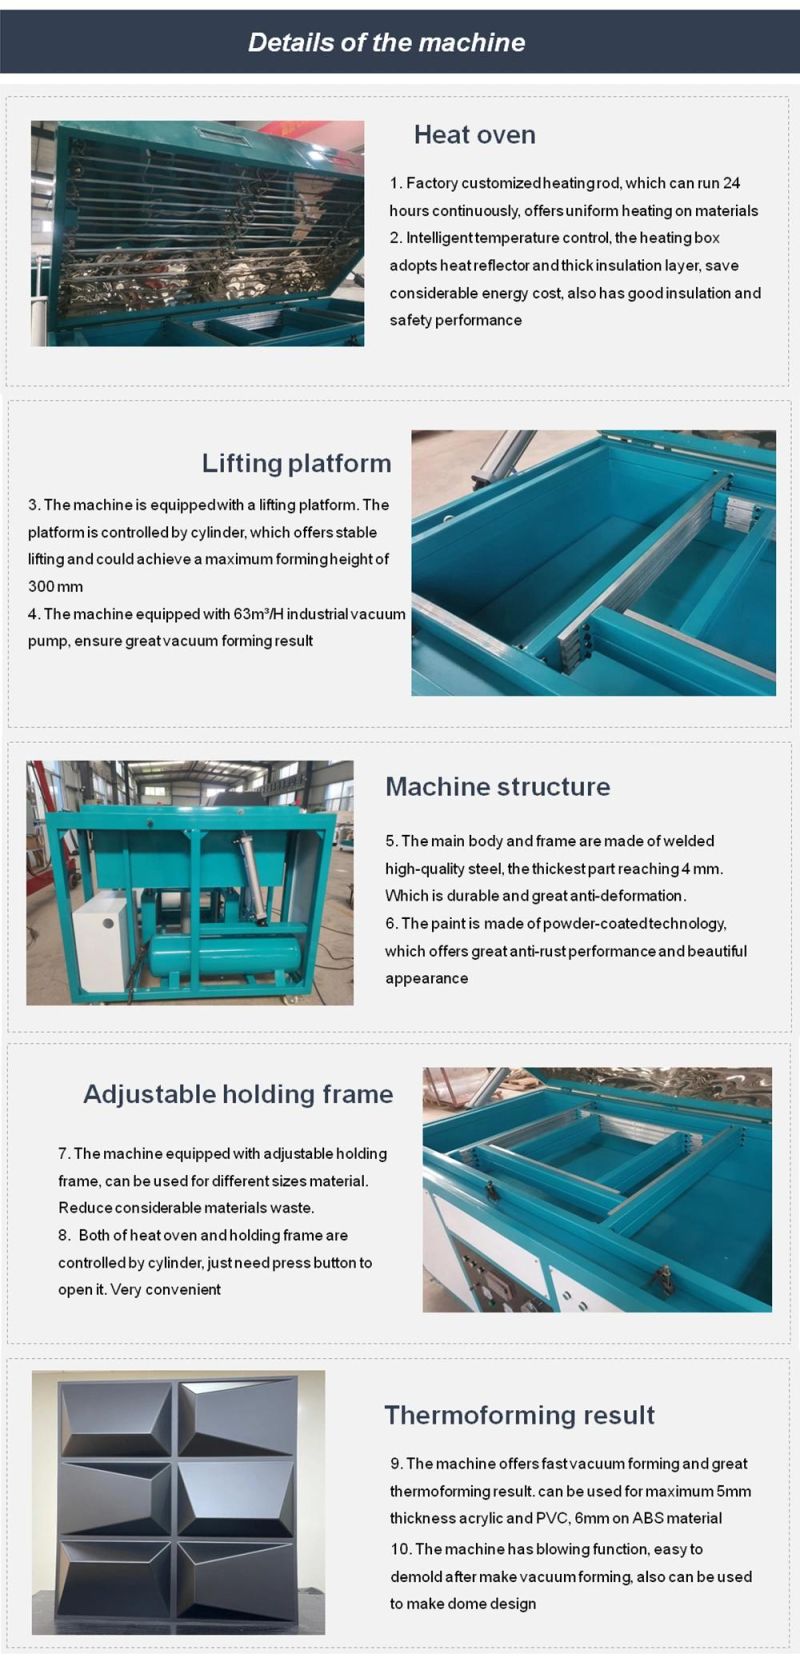 Automatic Thermoforming Plastic Vacuum Forming Machine Price for Acrylic ABS PVC PMMA Pet Sheet